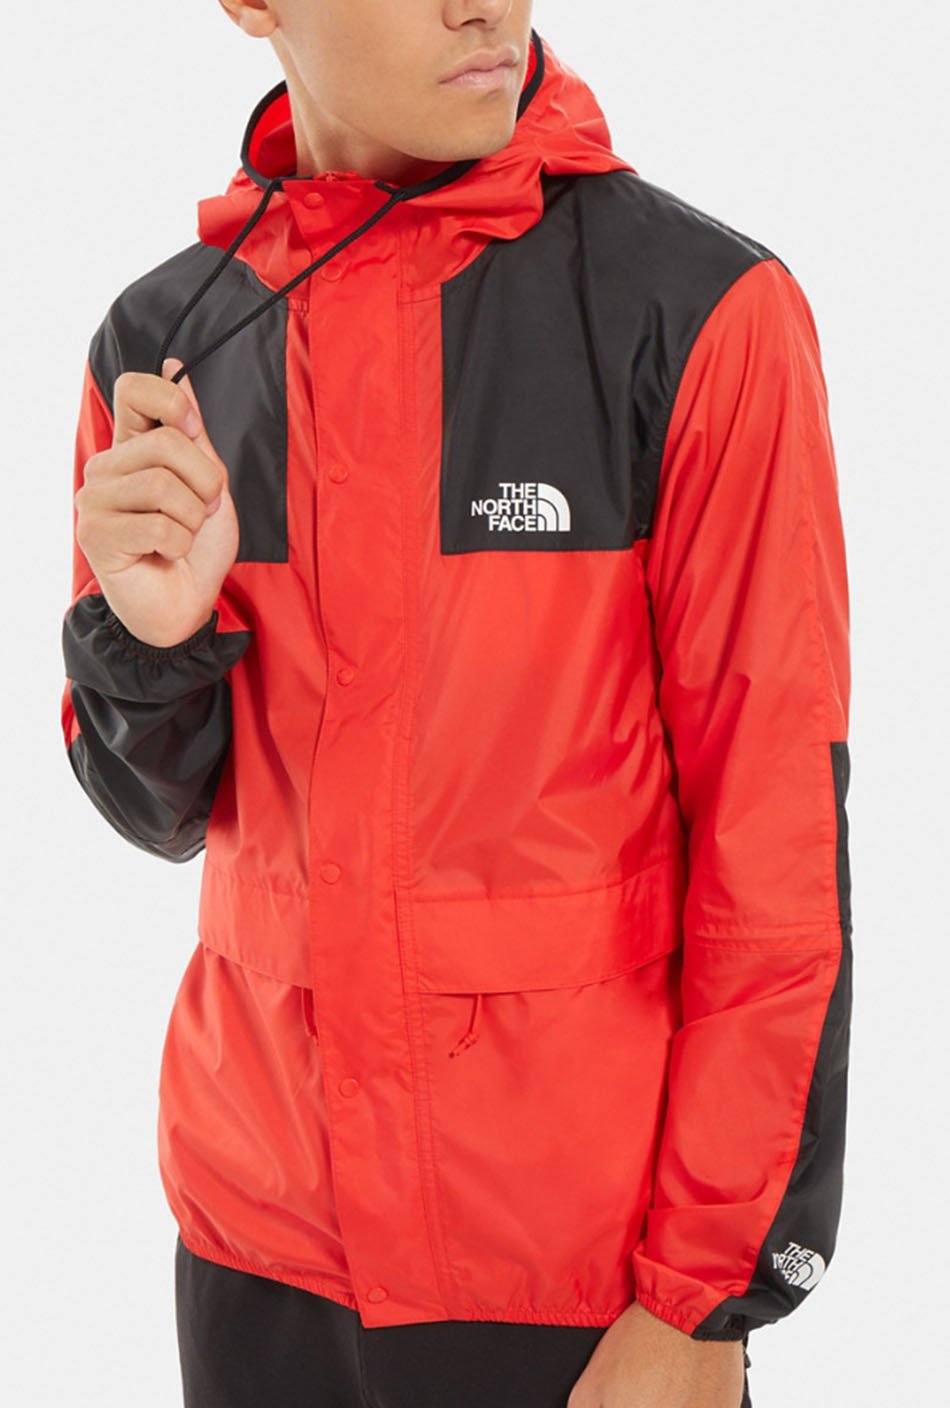 The North Face 1985 Seasonal Mountain Jacket Red/Black